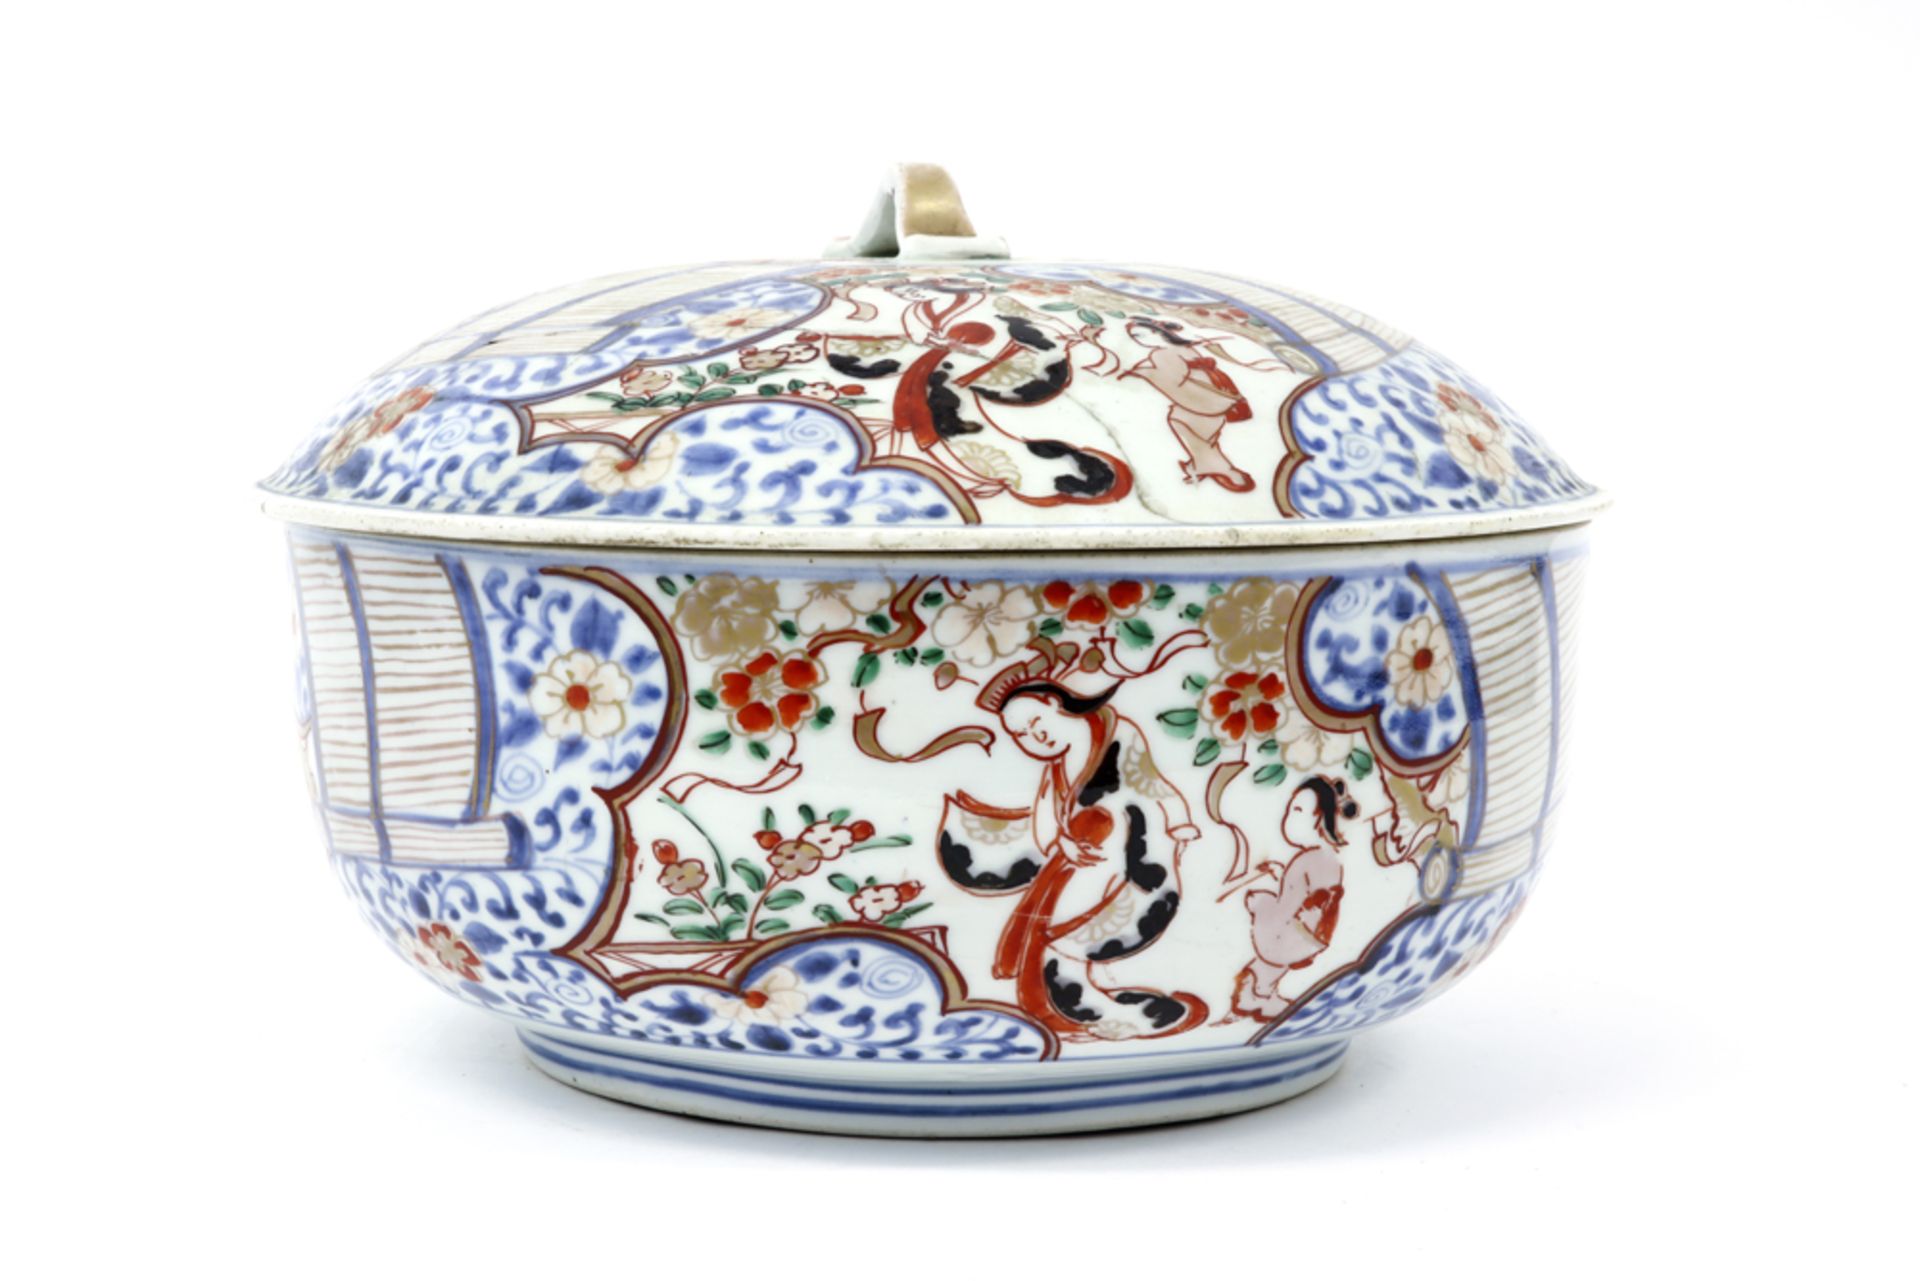 17th/18th Cent. Japanese lidded Arita tureen in porcelain with an Imari decor with female figures || - Image 2 of 4